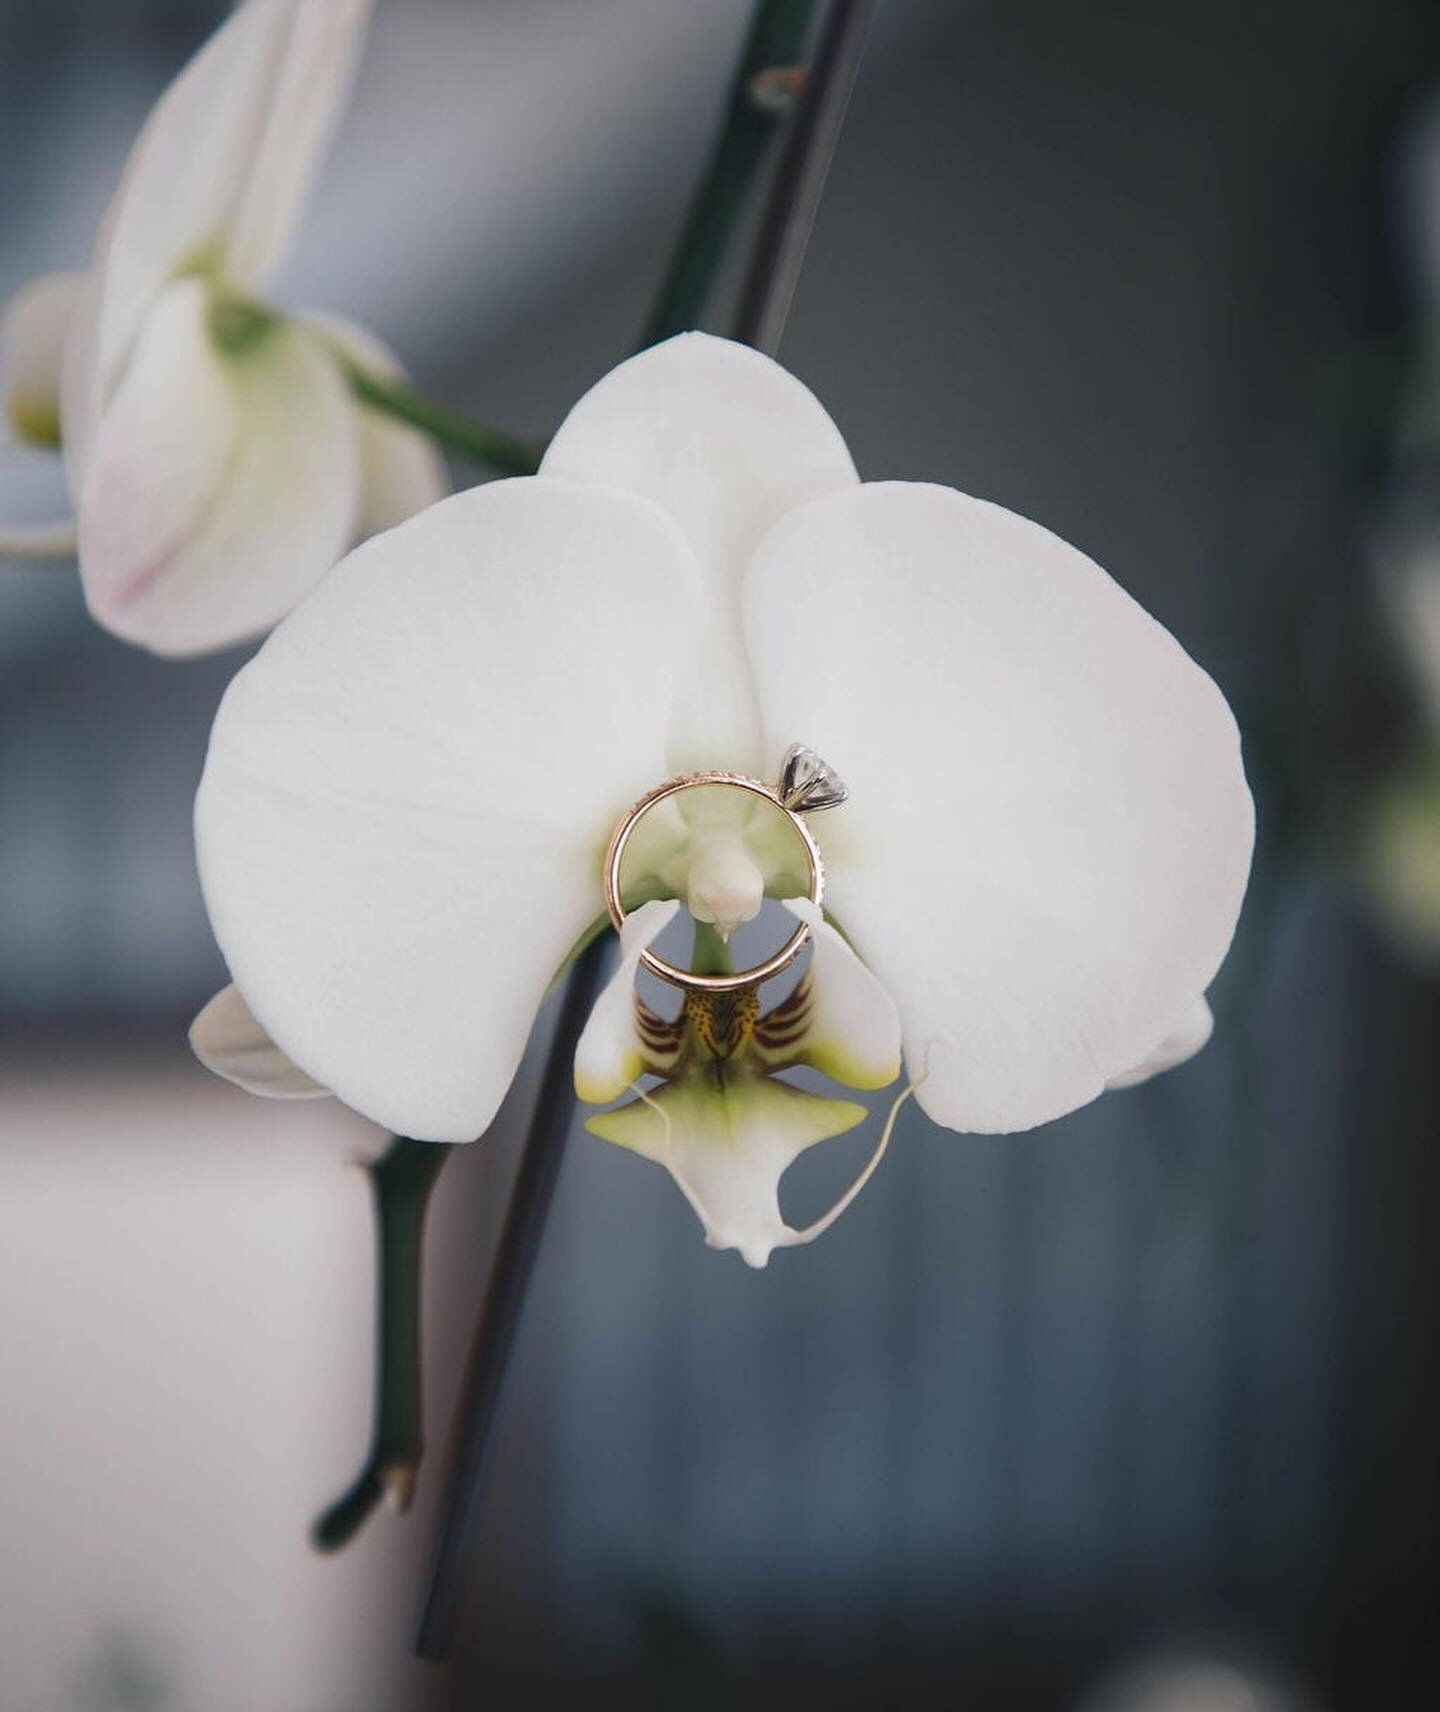 In the quiet chambers of our hearts, love unfurls like the petals of an orchid - each layer revealing a hidden tenderness. Just as an orchid thrives in the interplay of light and shadow, our love flourishes in the nuanced dance of vulnerability and s